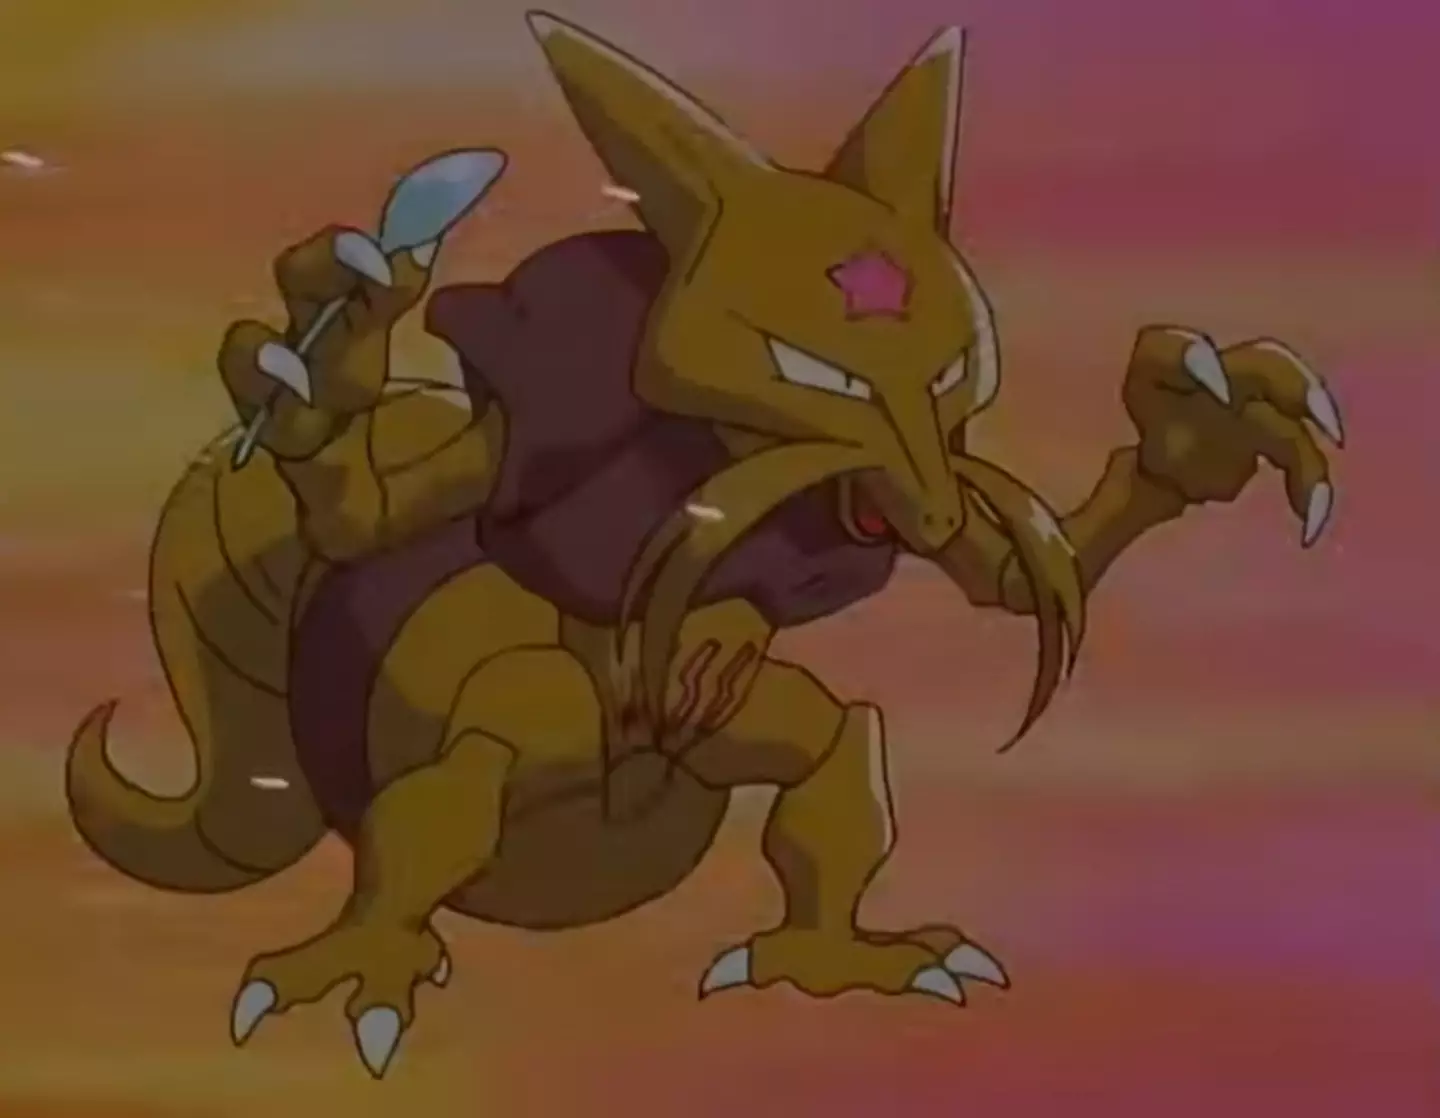 Let Kadabra have a spoon they said, it won't cause almost 20 years of legal battles they said.